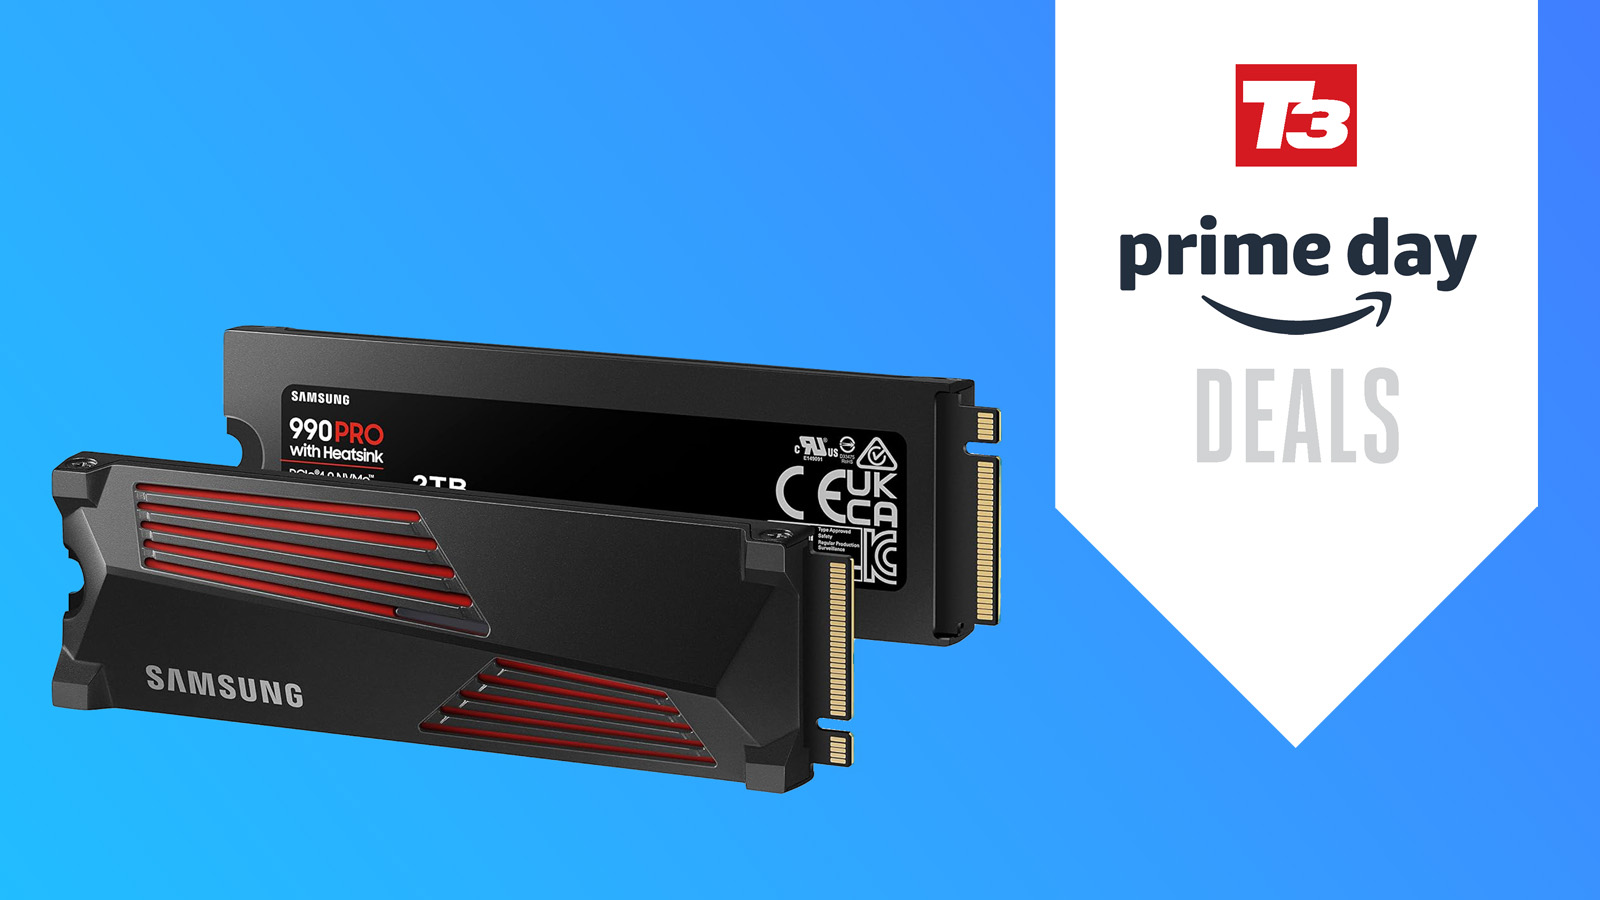 The Samsung 990 Pro PS5 SSD with heatsink can be had for its lowest ever  price right now.